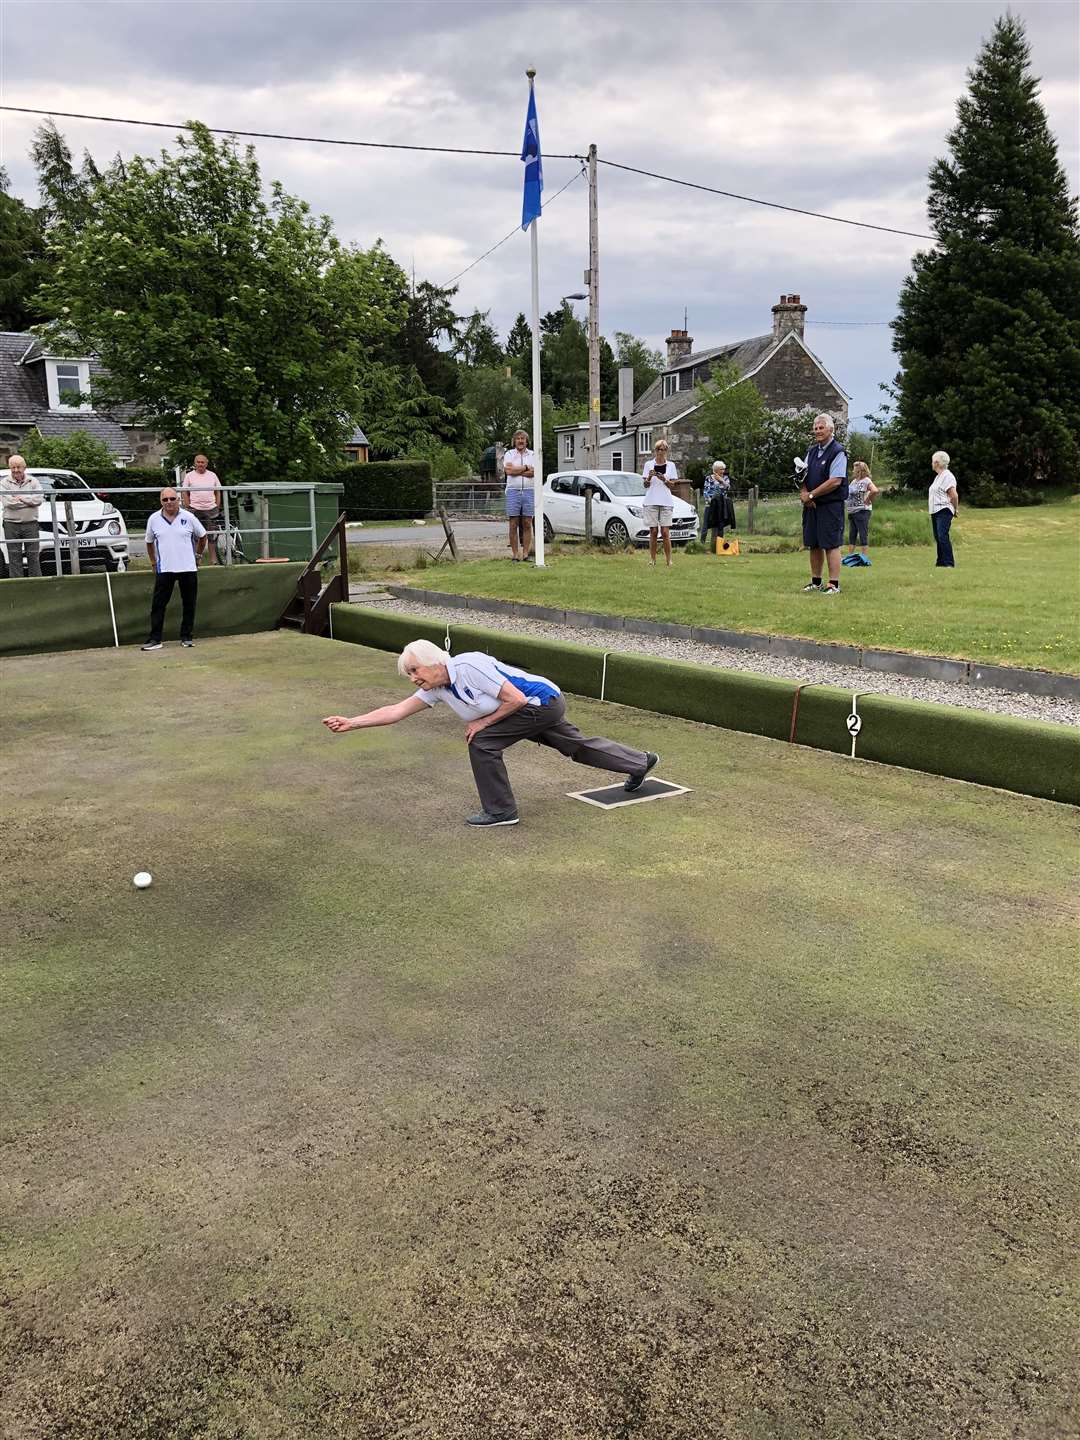 Jean Slimon throws the first jack of the 2020 season at Newtonmore Bowling Club.